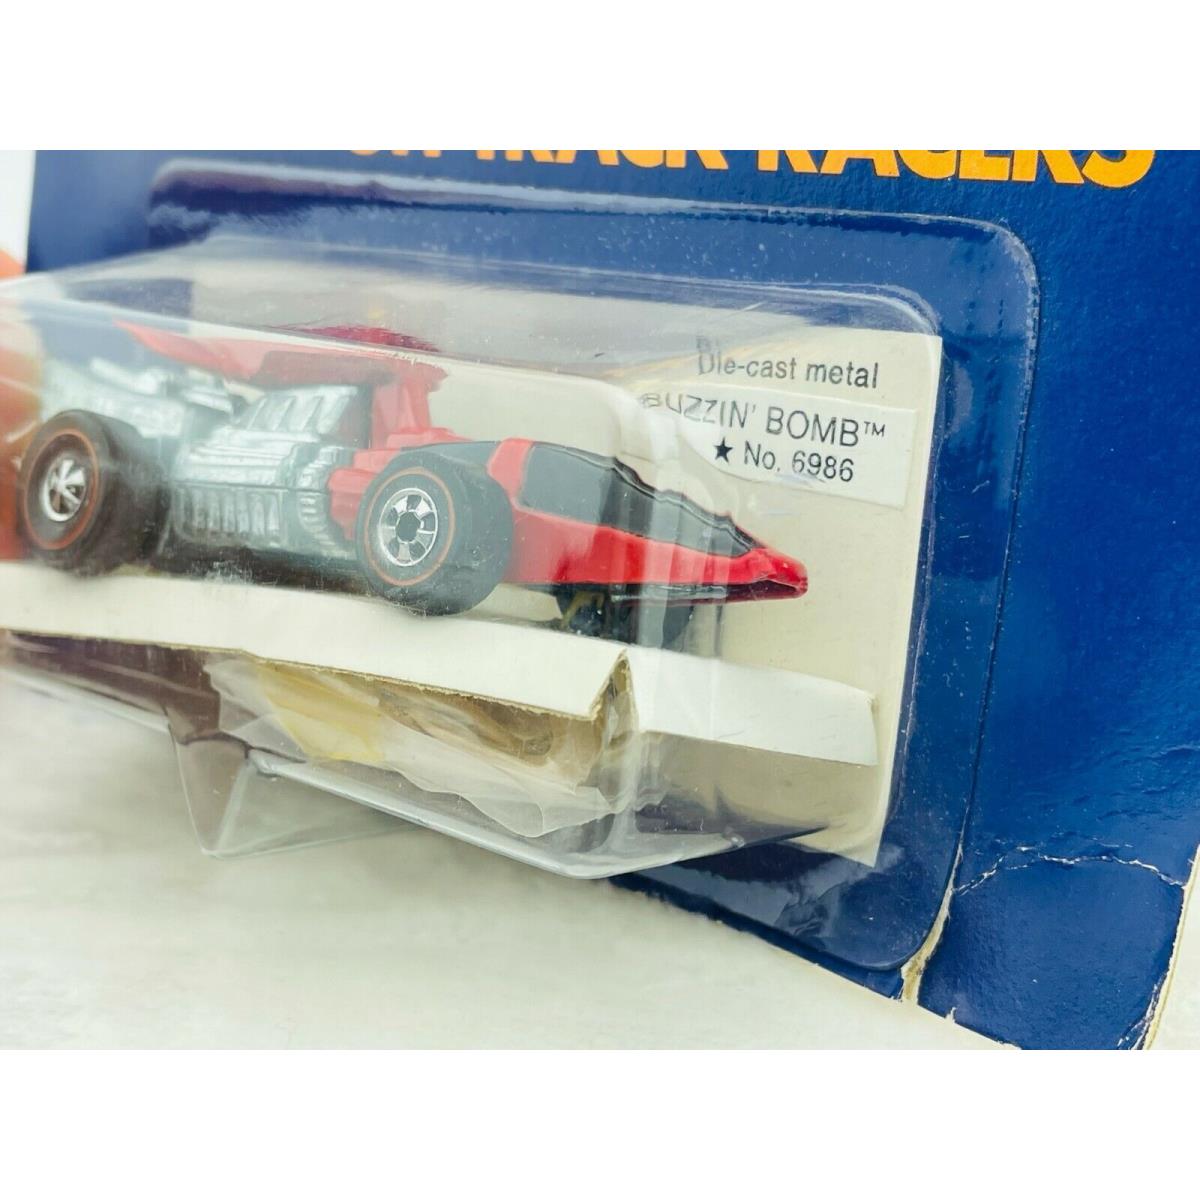 Hot Wheels toy  - Red